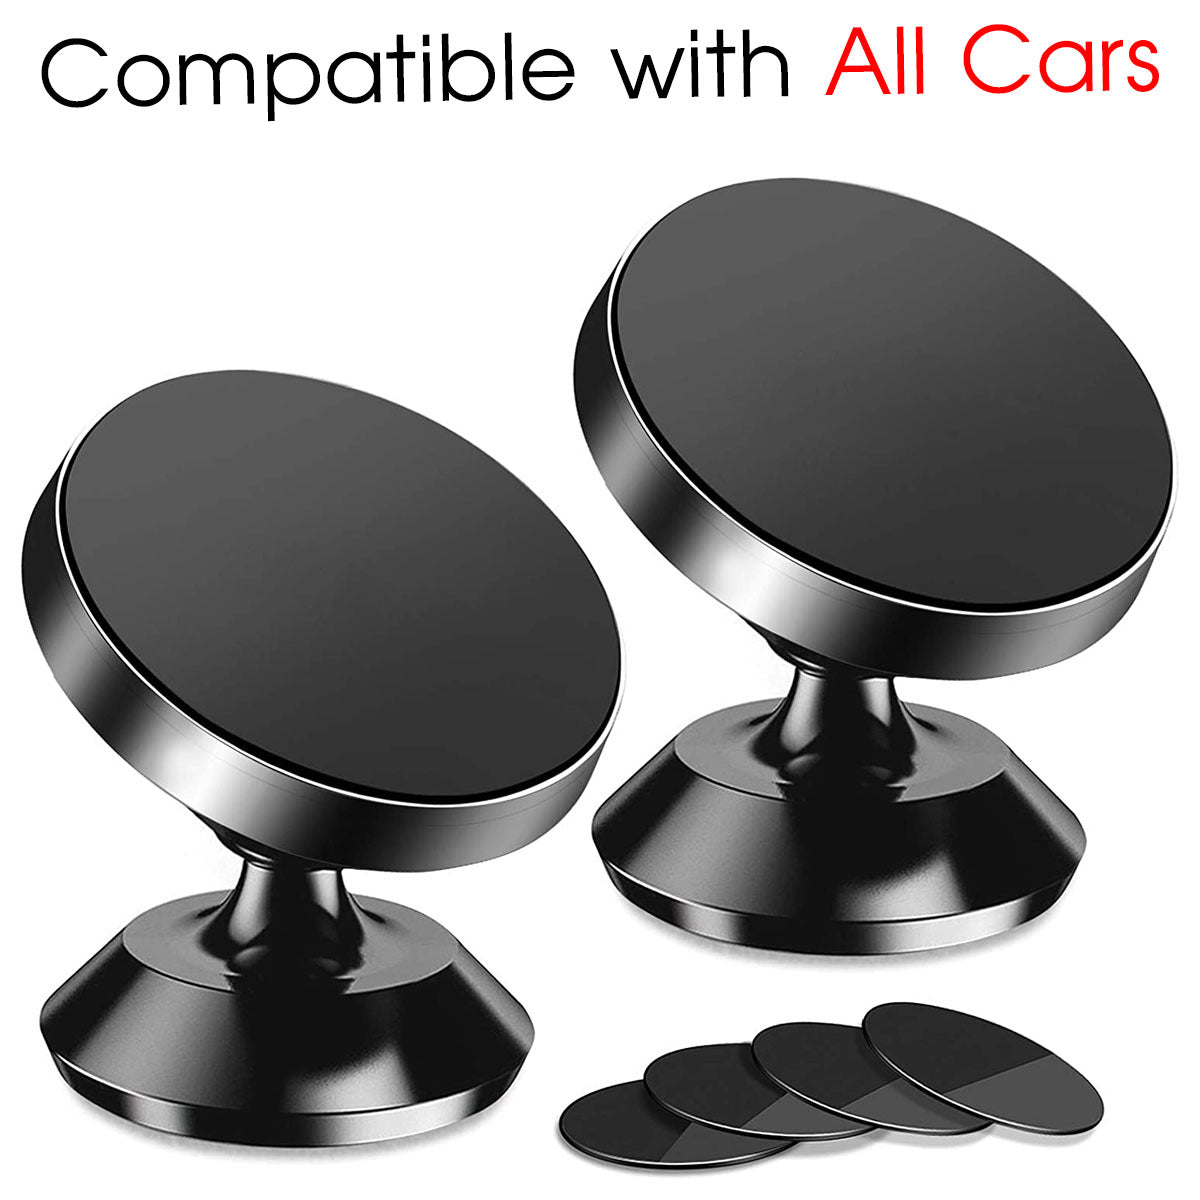 [2 Pack ] Magnetic Phone Mount, Custom For Your Cars, [ Super Strong Magnet ] [ with 4 Metal Plate ] car Magnetic Phone Holder, [ 360° Rotation ] Universal Dashboard car Mount Fits All Cell Phones, Car Accessories AR13982